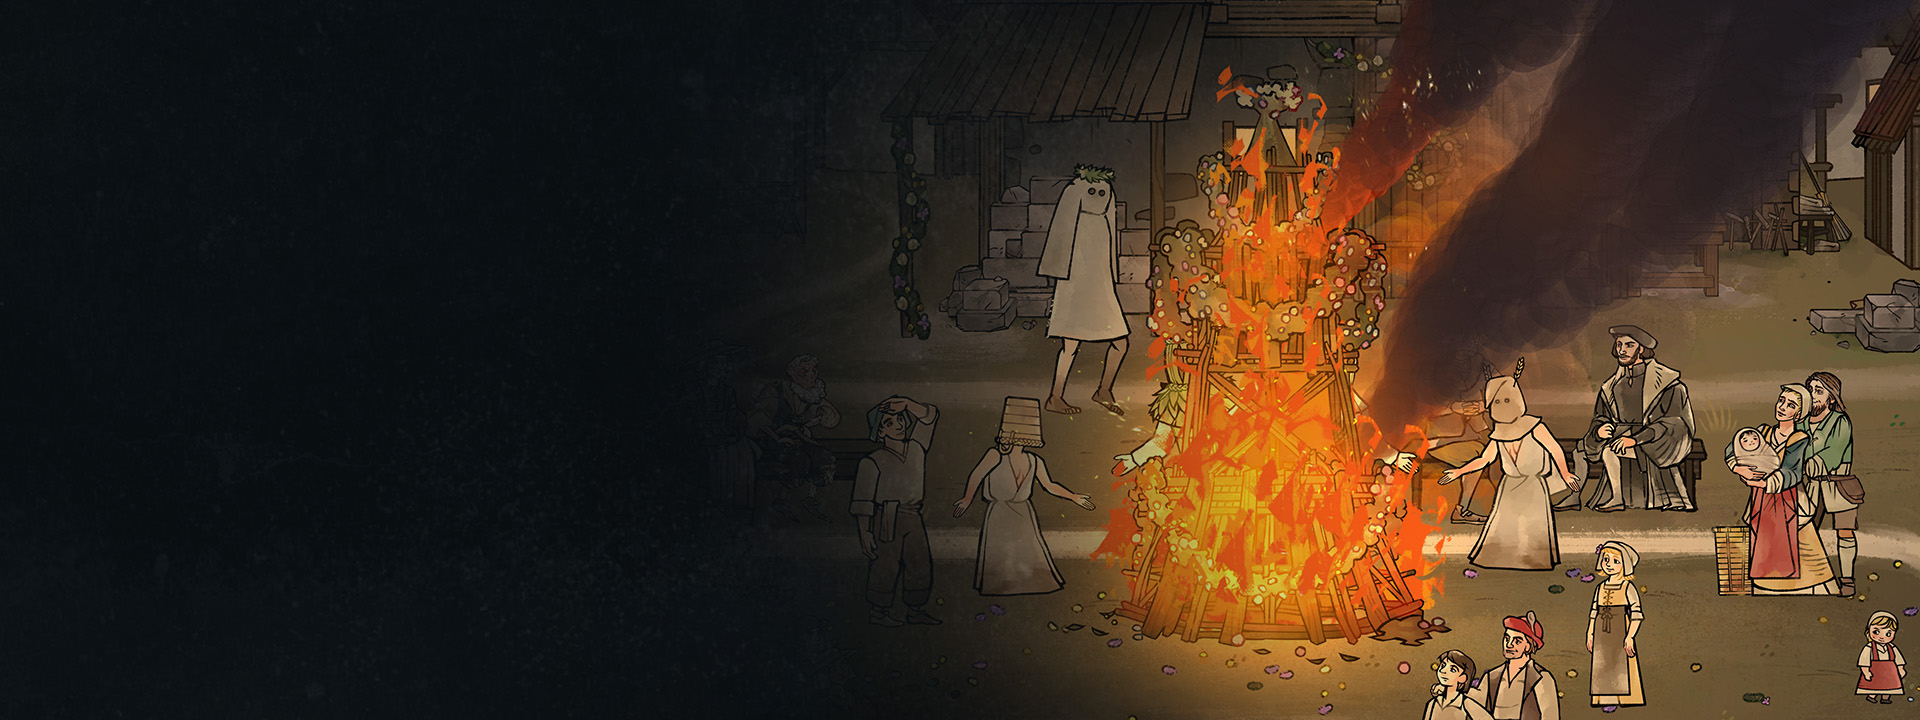 Characters dancing around a fire